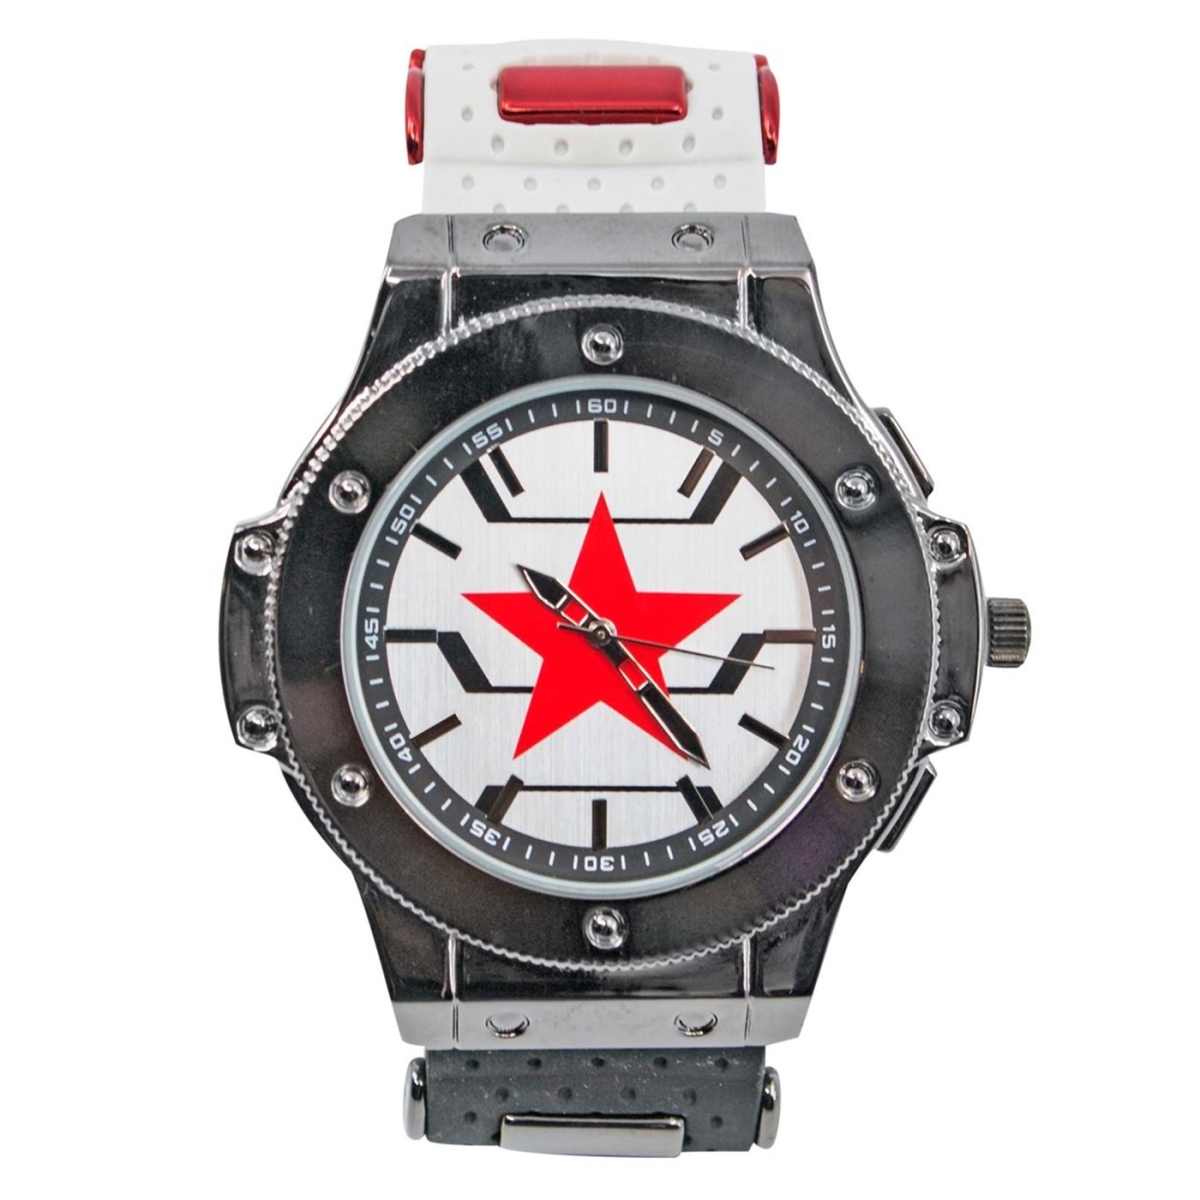 Picture of The Winter Soldier wtchwsarmor The Winter Soldier Winter Soldier Armor Watch with Adjustable Strap